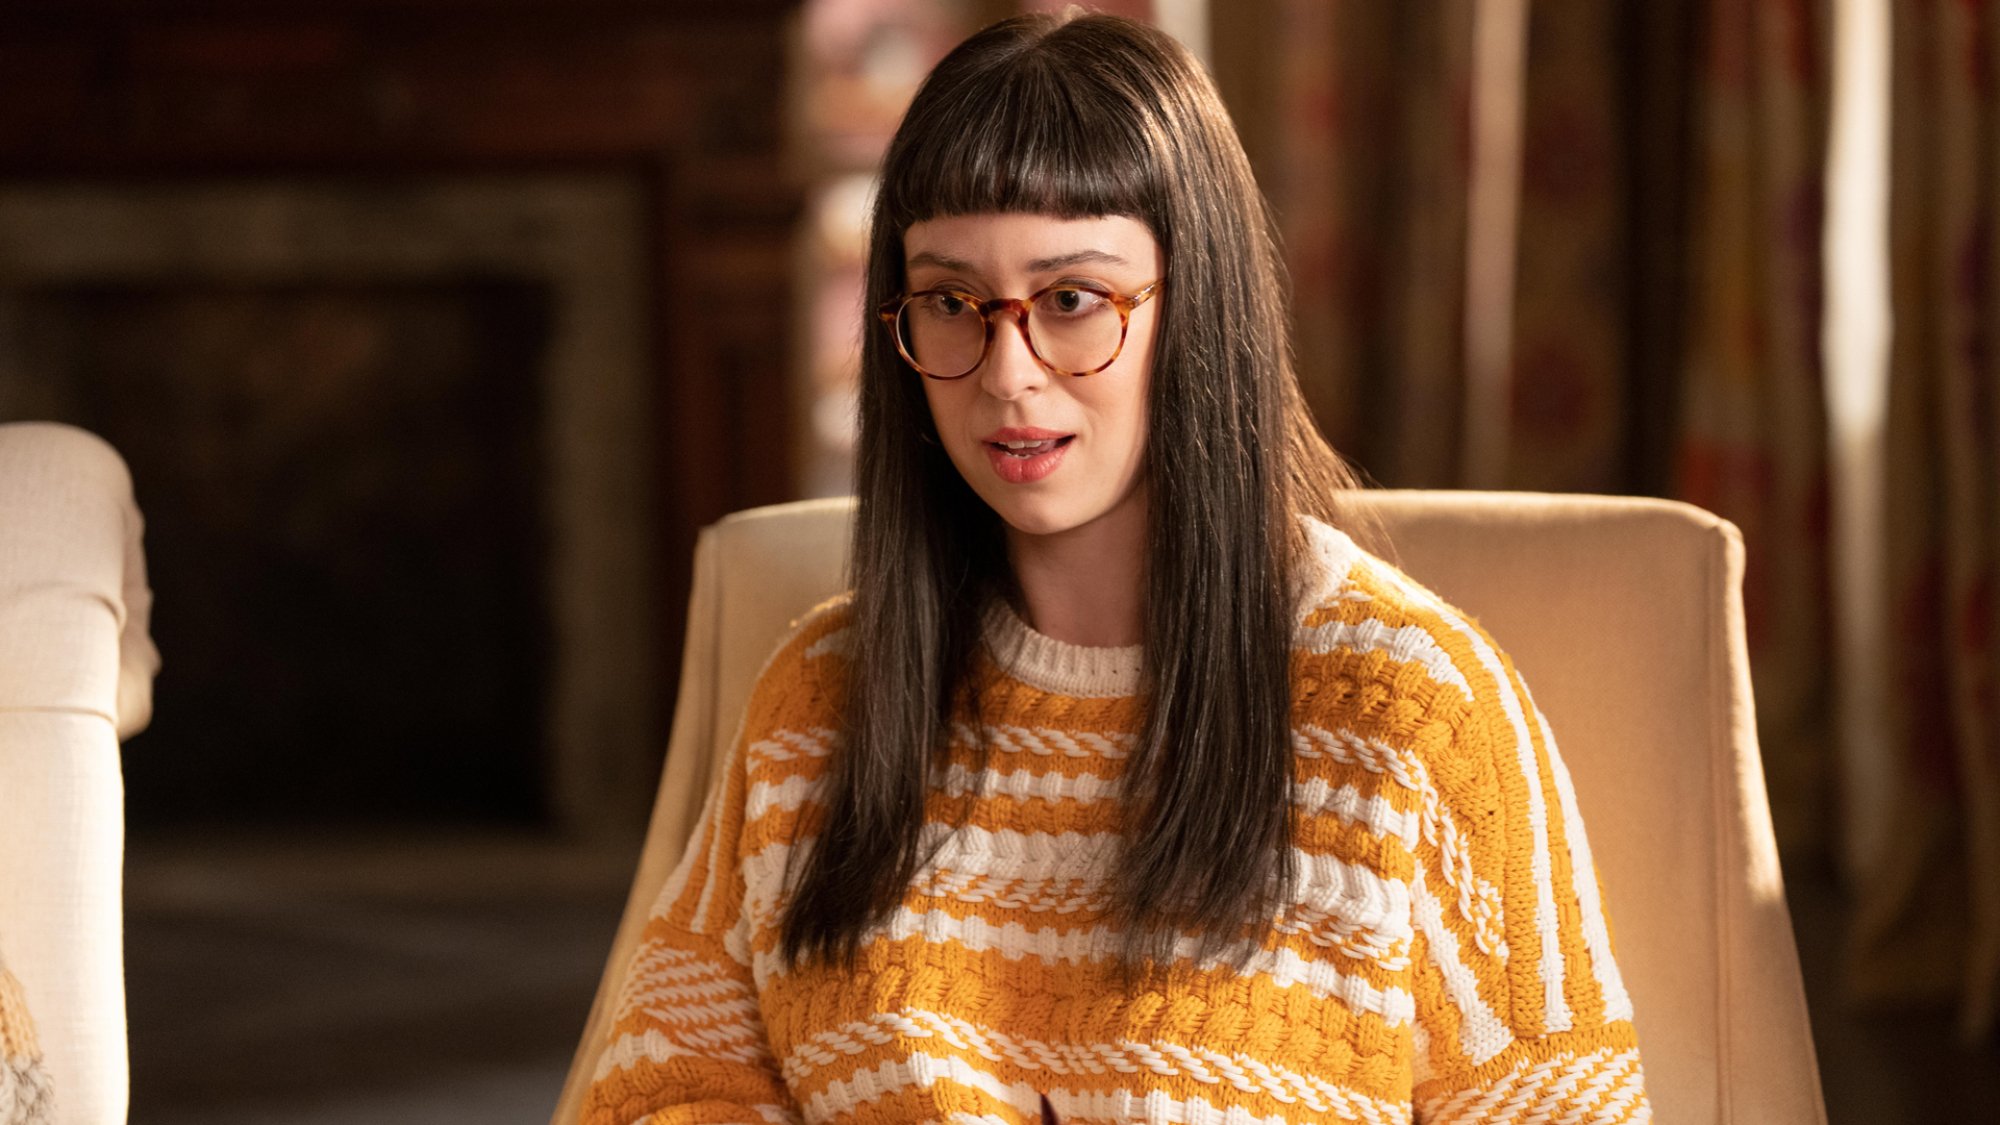 A woman with glasses wears a yellow striped sweater sitting in. chair.